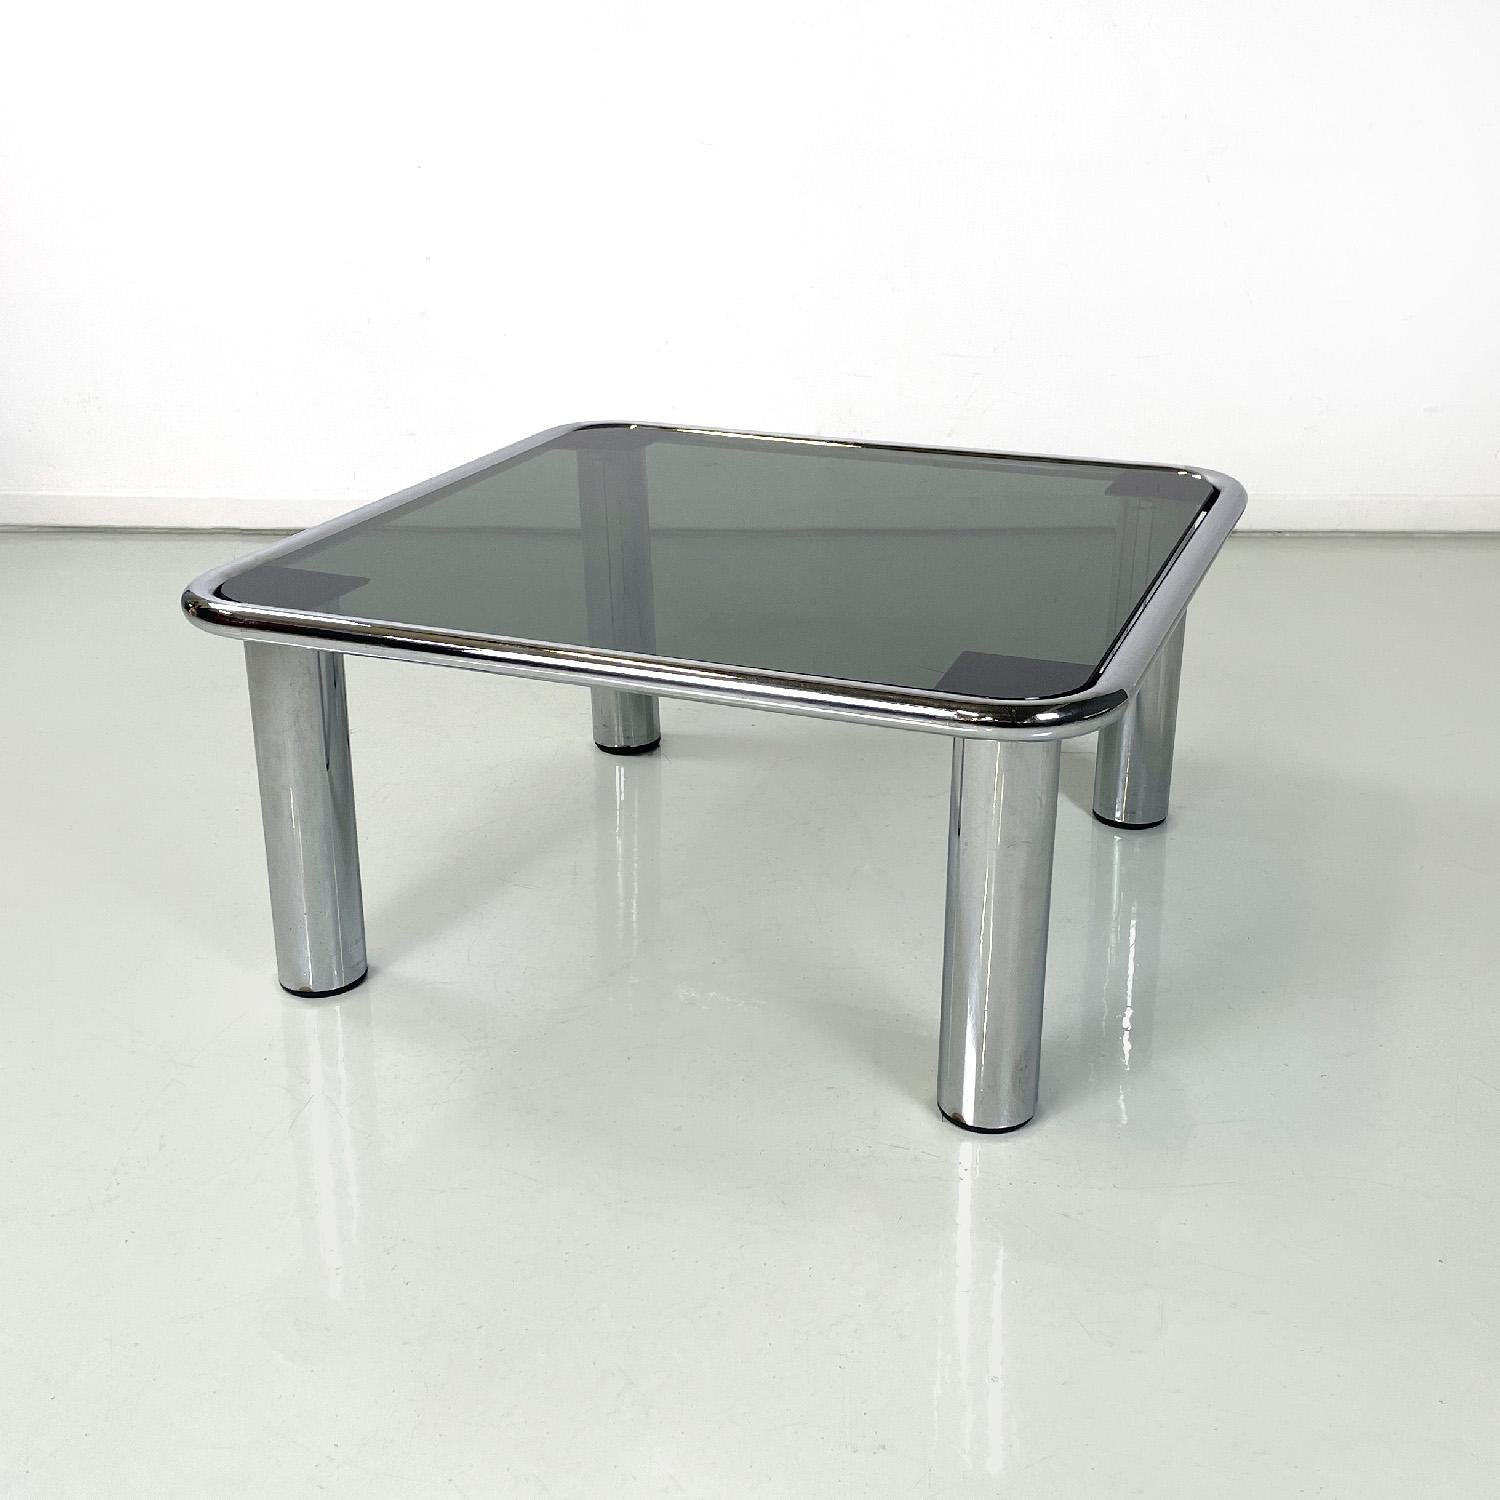 Italian modern coffee table Sesann by Gianfranco Frattini for Cassina, 1970s
Square coffee table mod. Sesann. The structure is in chromed tubular steel, the dark gray smoked glass rests on four triangular elements.
Produced by Cassina in 1970s and